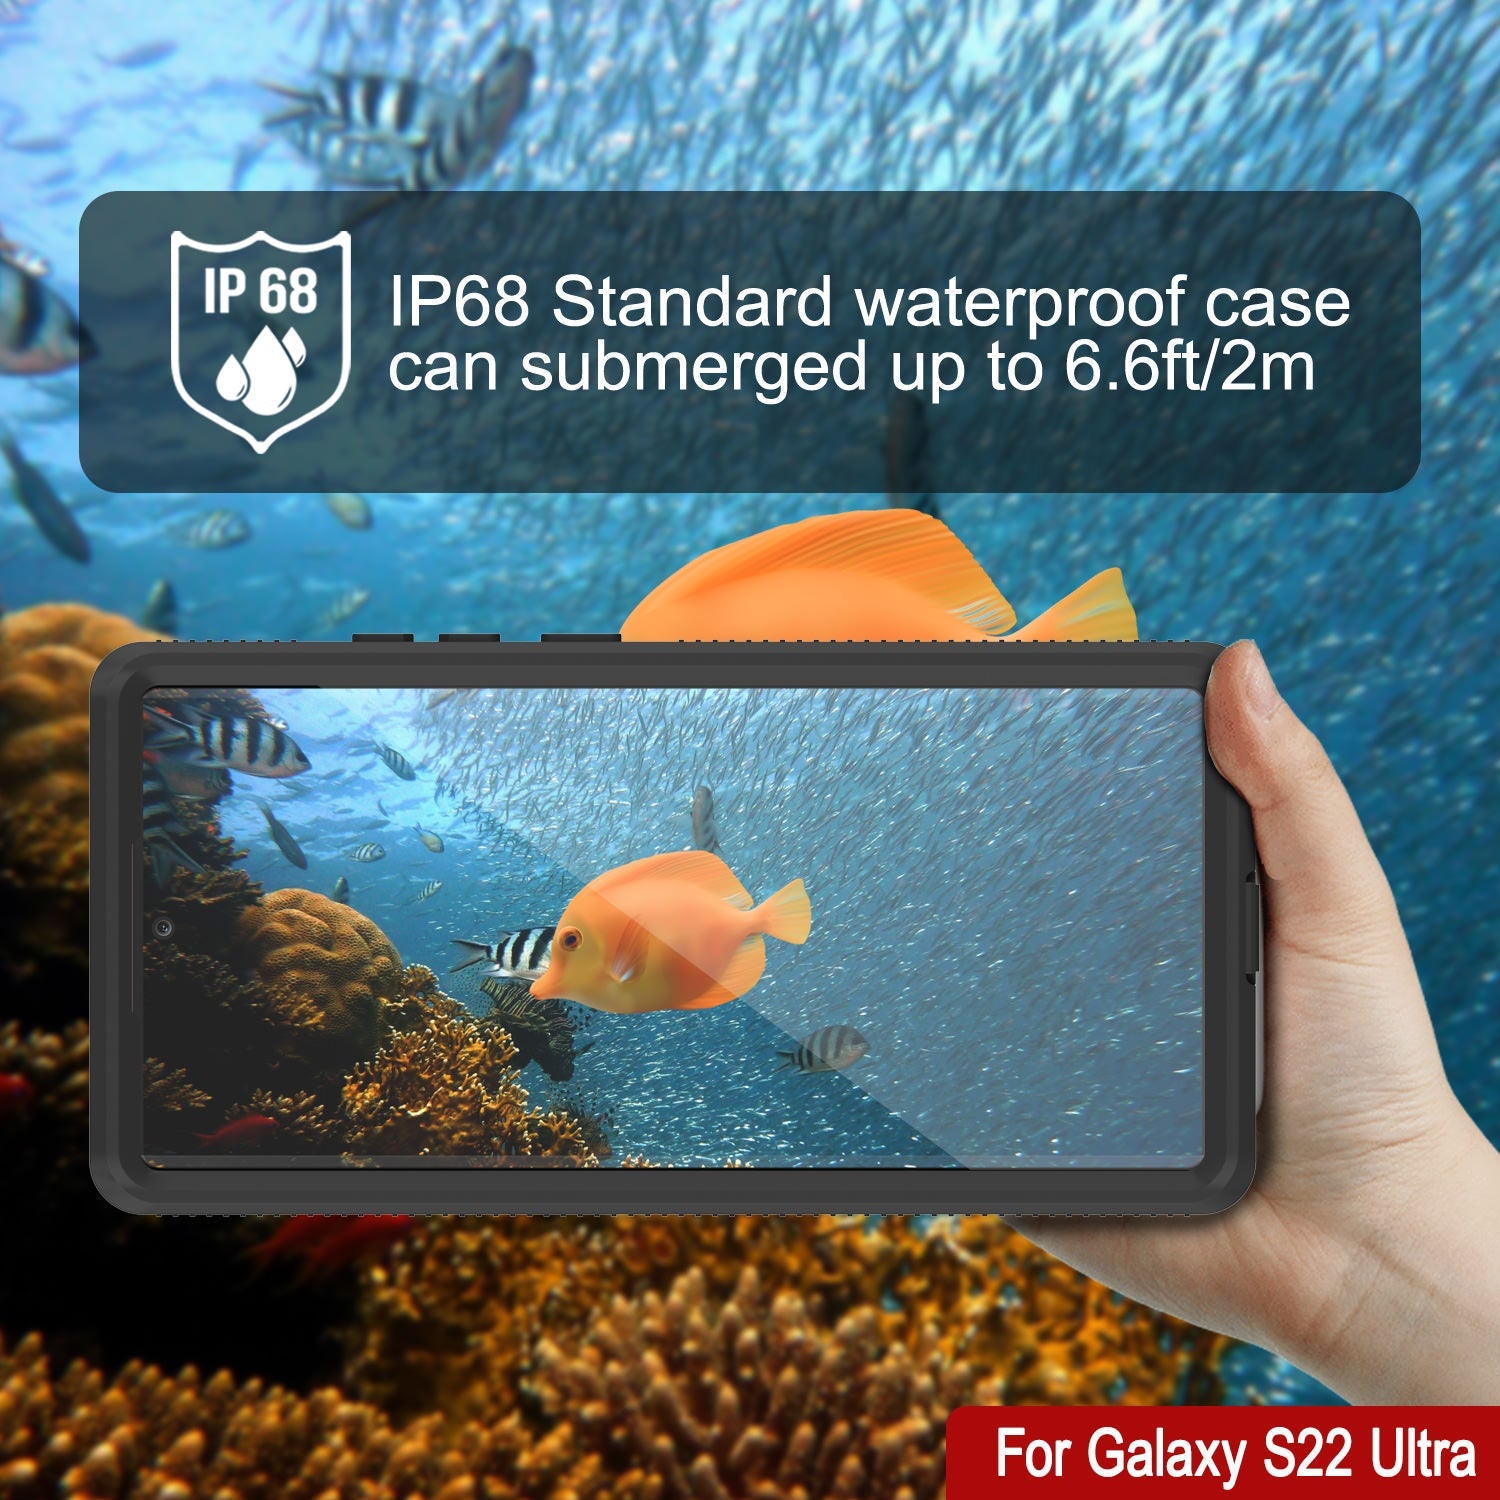 Galaxy S22 Ultra Waterproof Case PunkCase Ultimato Red Thin 6.6ft Underwater IP68 Shock/Snow Proof [Red]